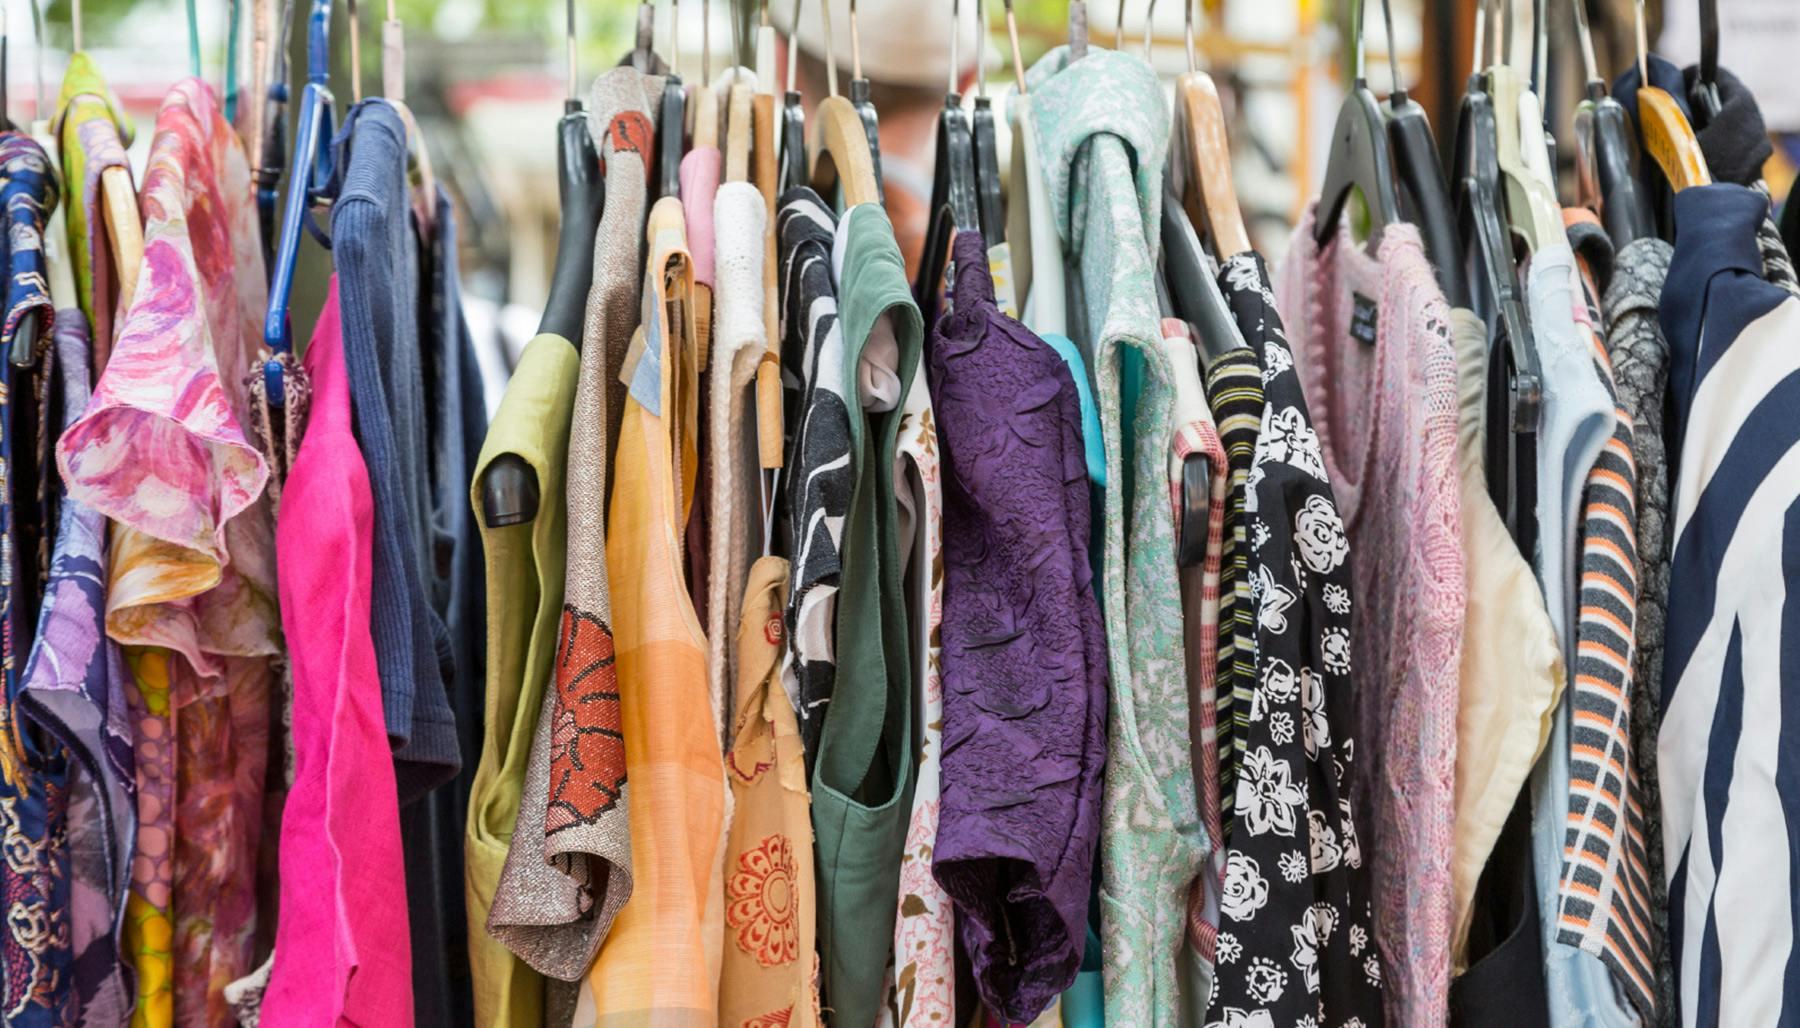 Articles | How to Sell Old Clothes for Money